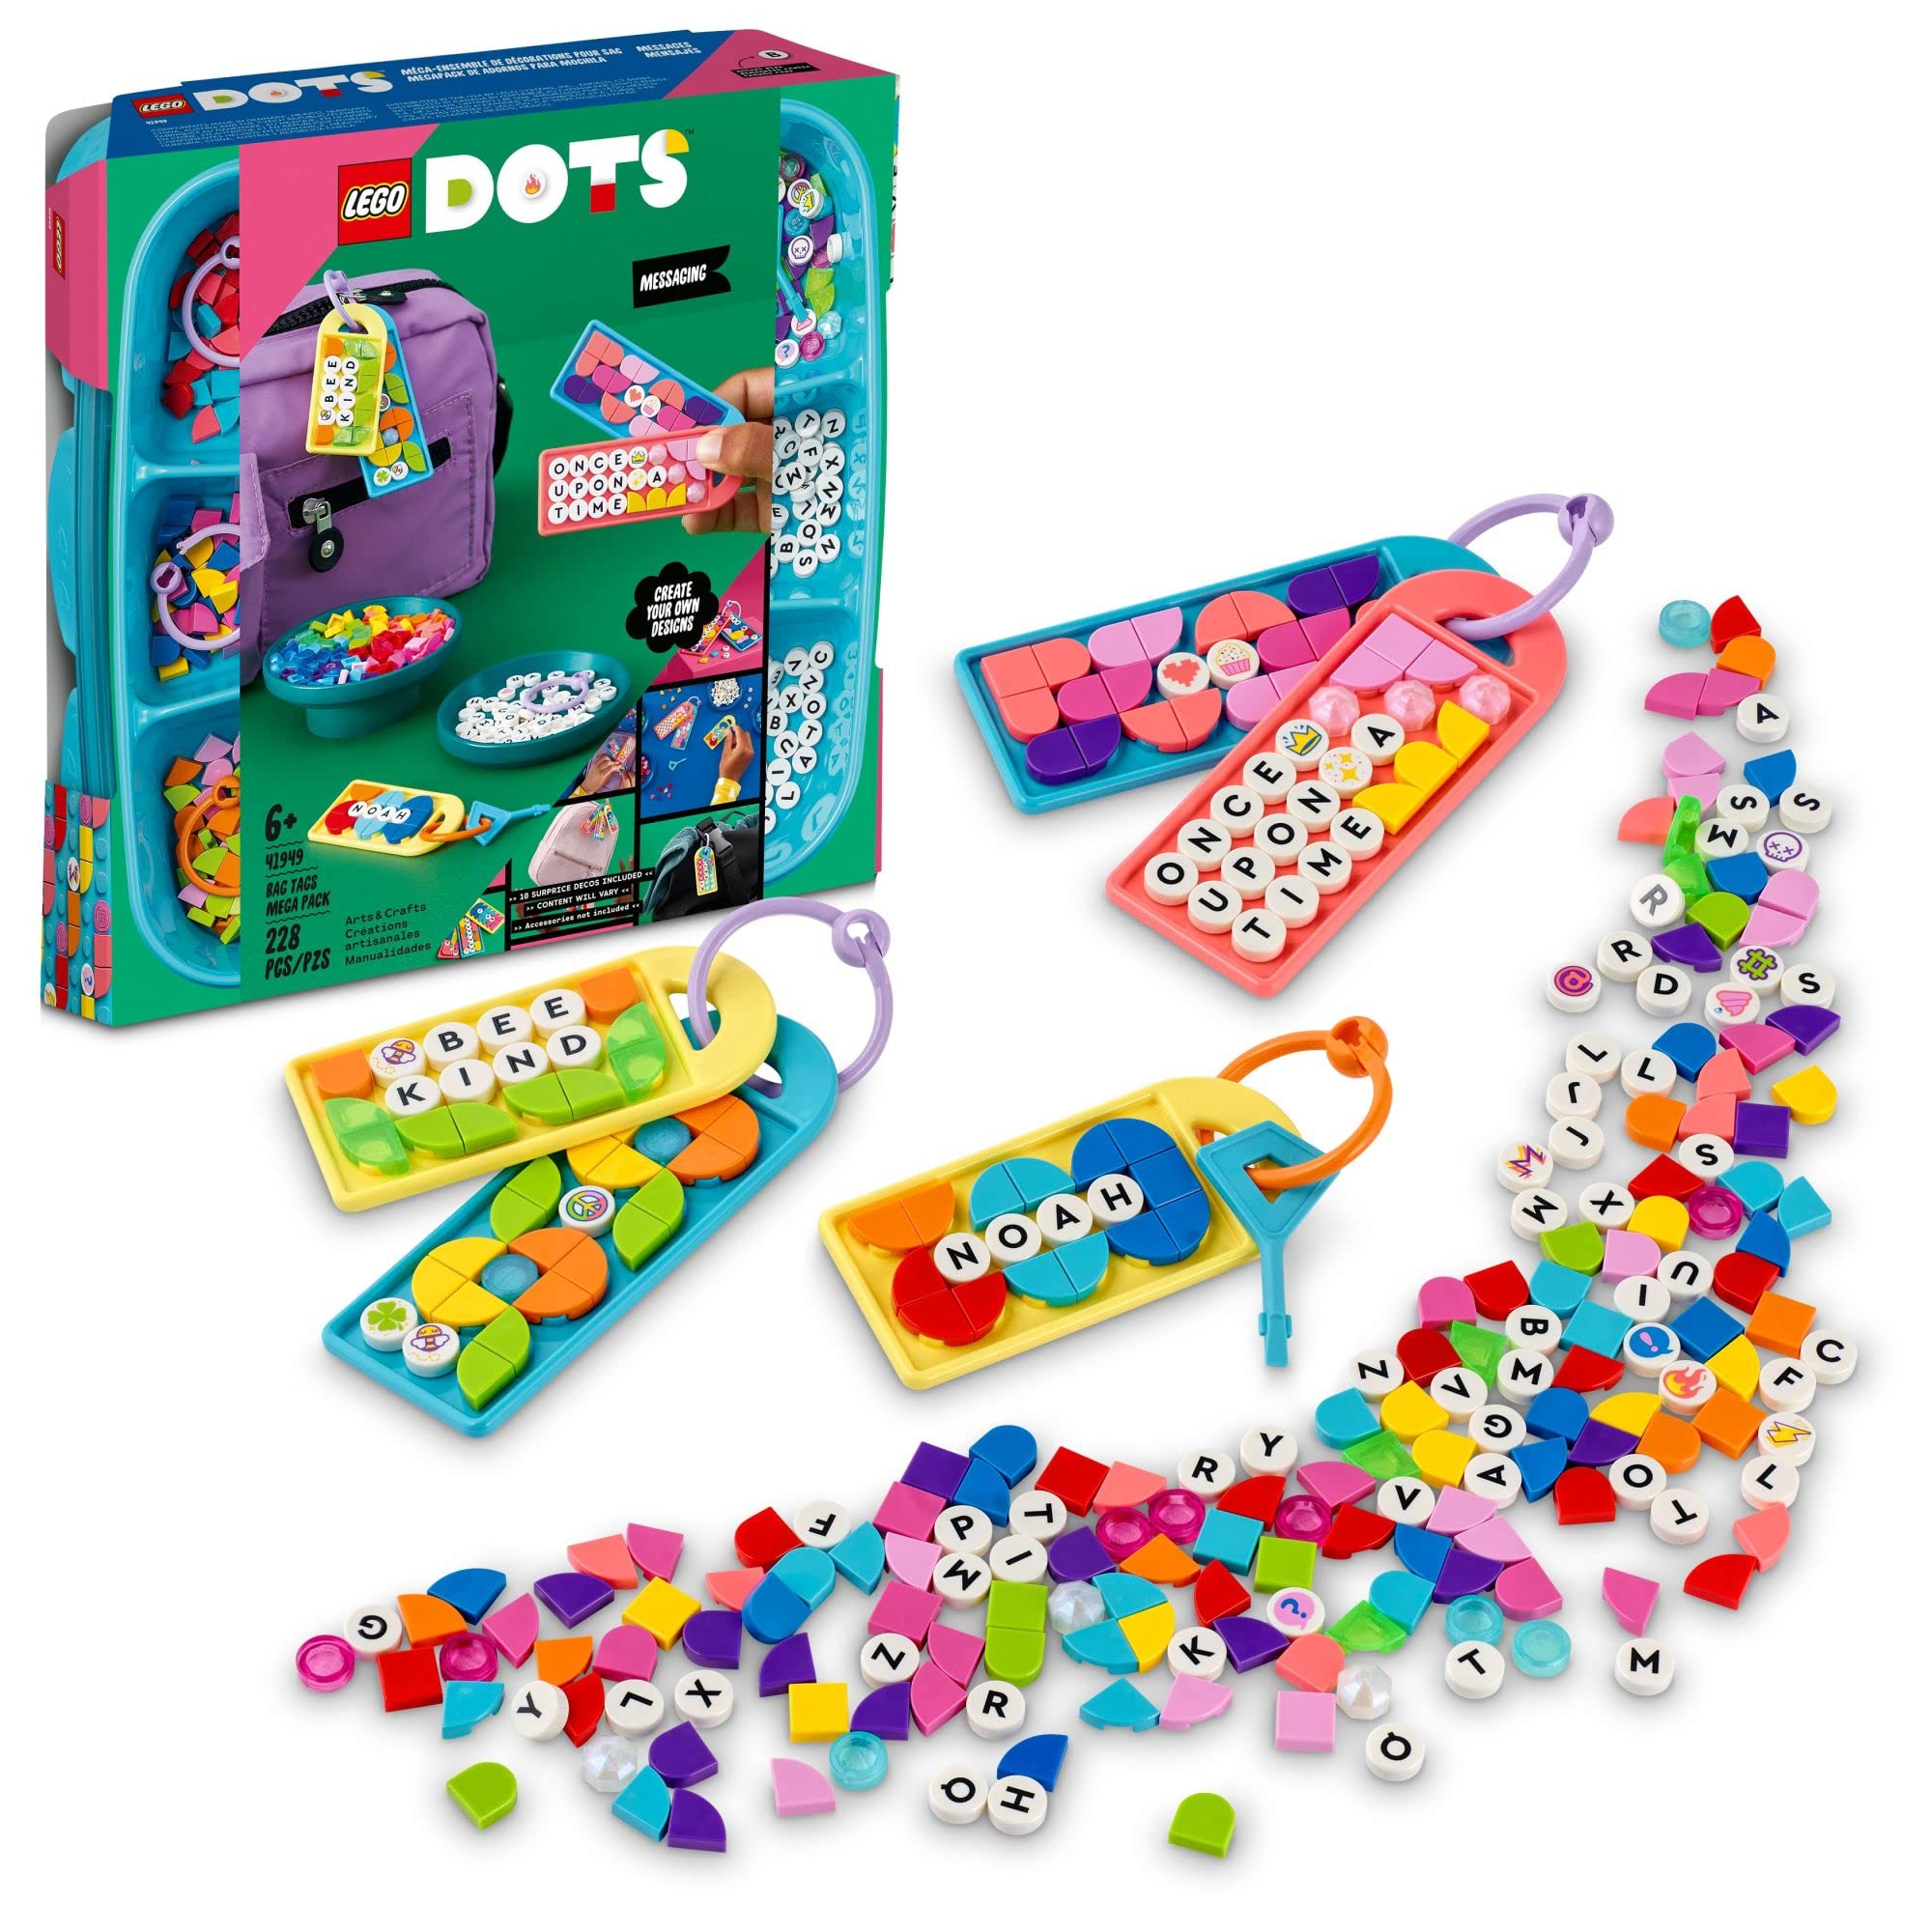 228-Piece LEGO DOTS Bag Tags Mega Pack Messaging DIY Customizable Craft Kit (41949) $14.93 + Free Shipping w/ Prime or Orders $25+